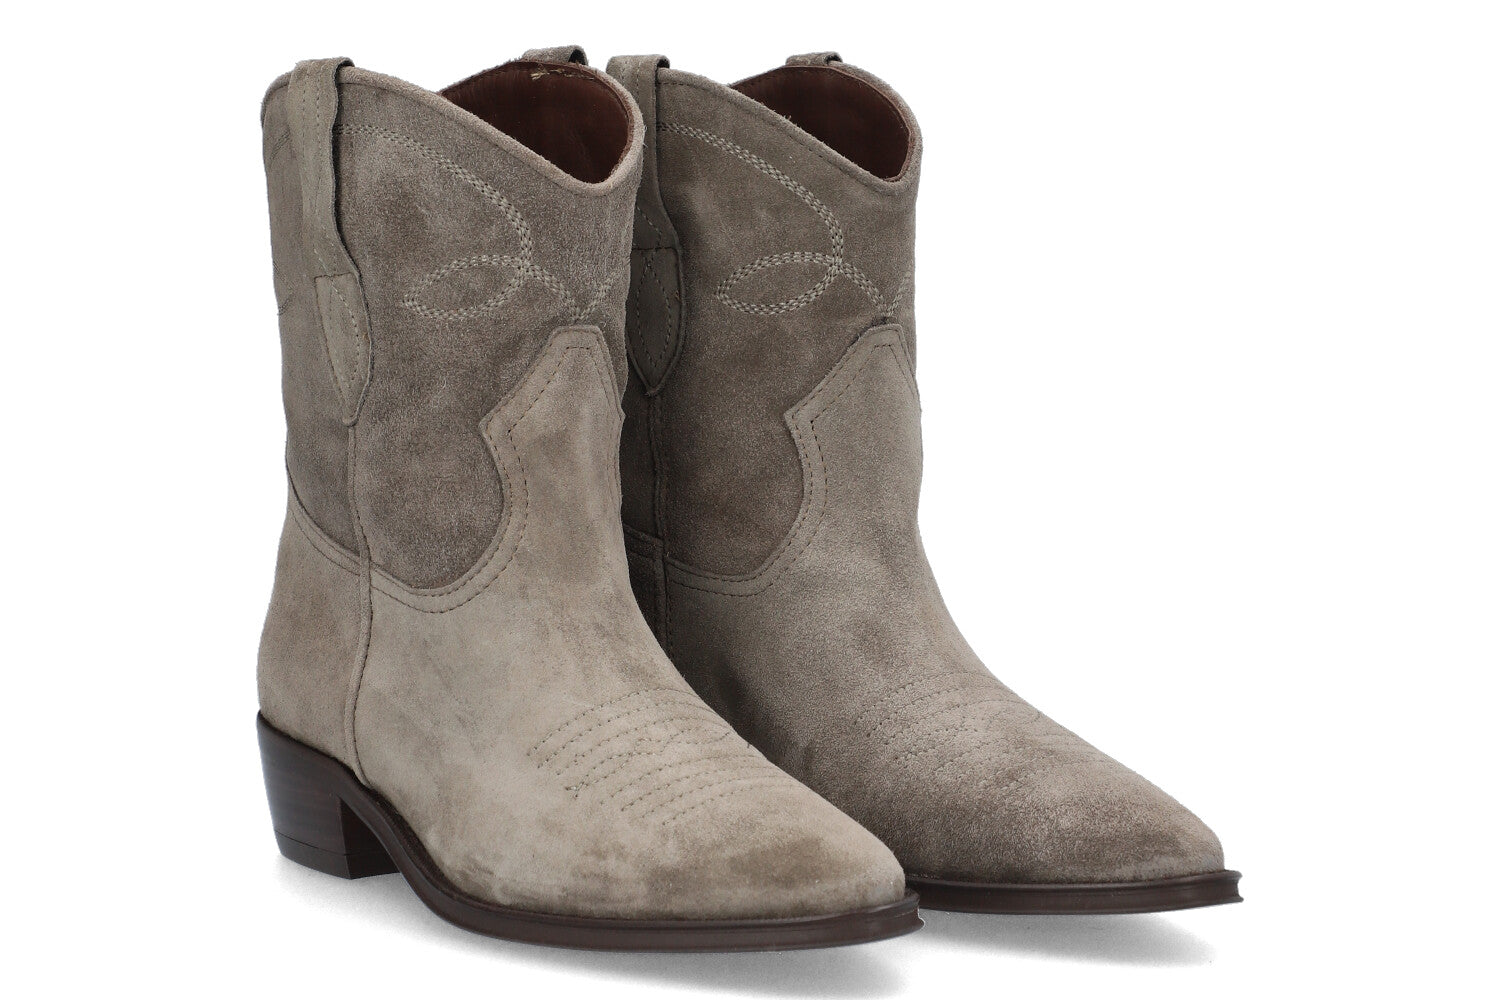 Alpe Cecile 22351121 Ladies Spanish Taupe Suede Slip On Ankle Boots